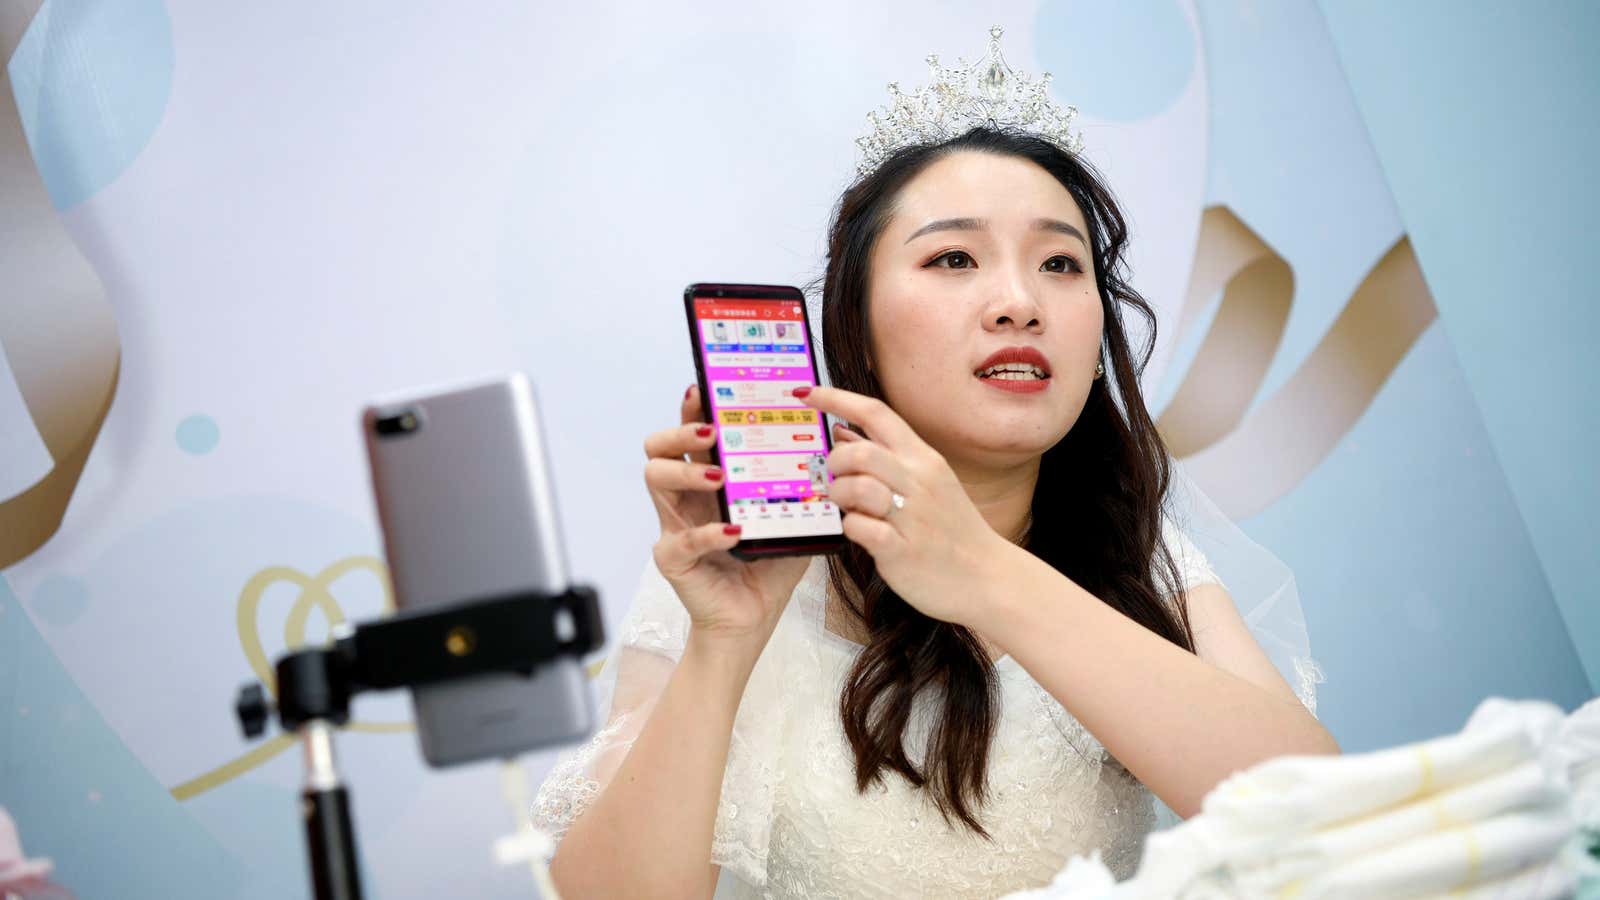 A live-streaming anchor wearing a wedding gown promotes Pampers baby diapers through a live streaming session on the eve of the 11.11 Singles’ Day shopping…